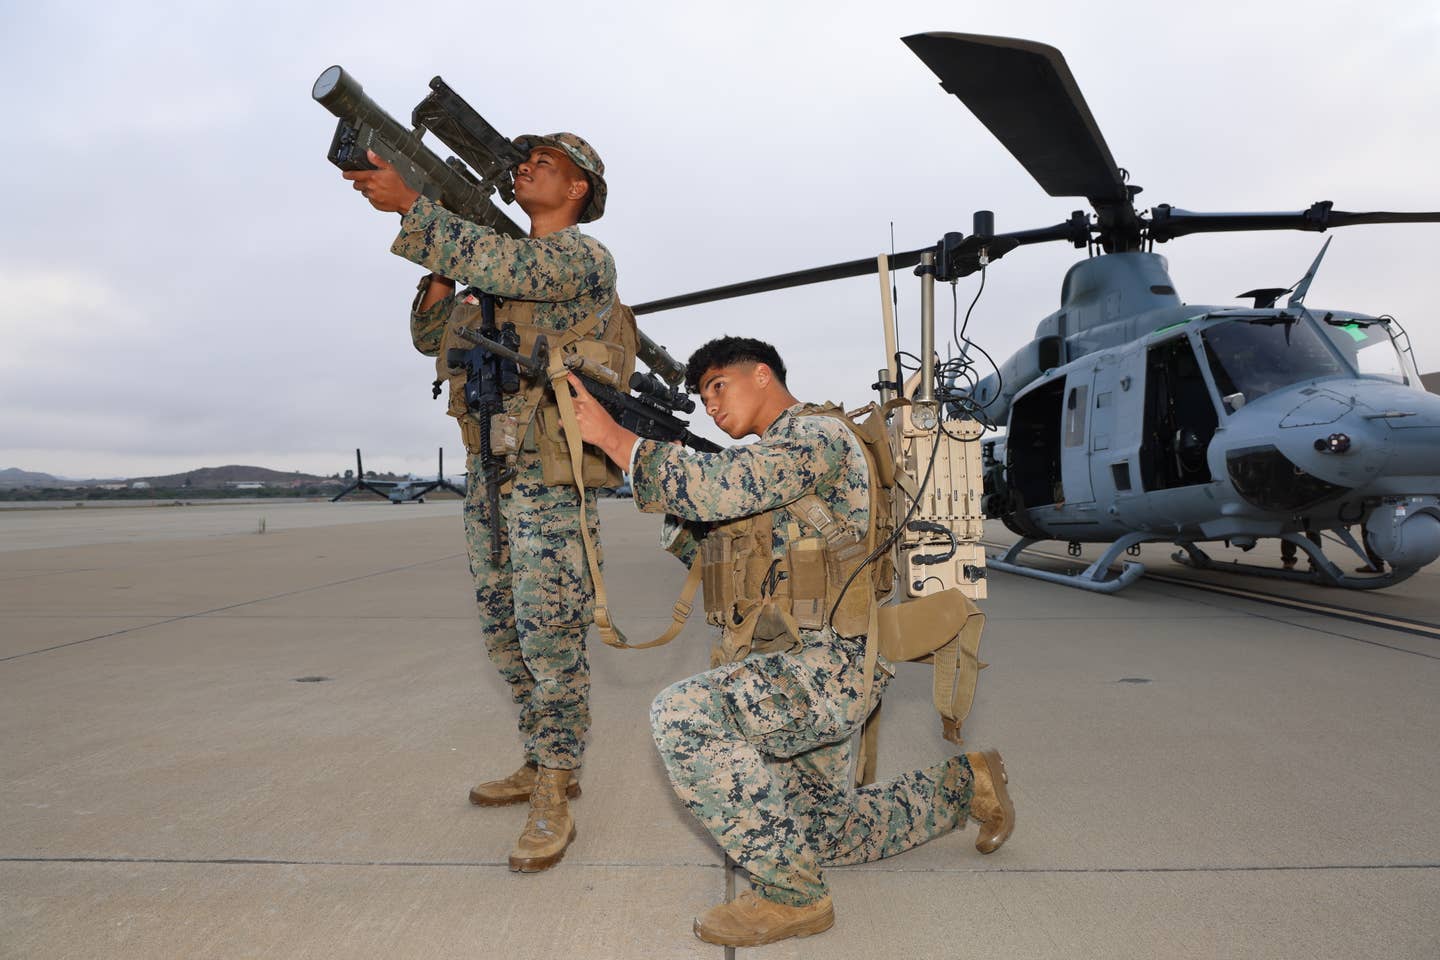 LAAD Marines with an FIM-92 Stinger SAM, M4, and an electronic warfare backpack. (James Deboer)